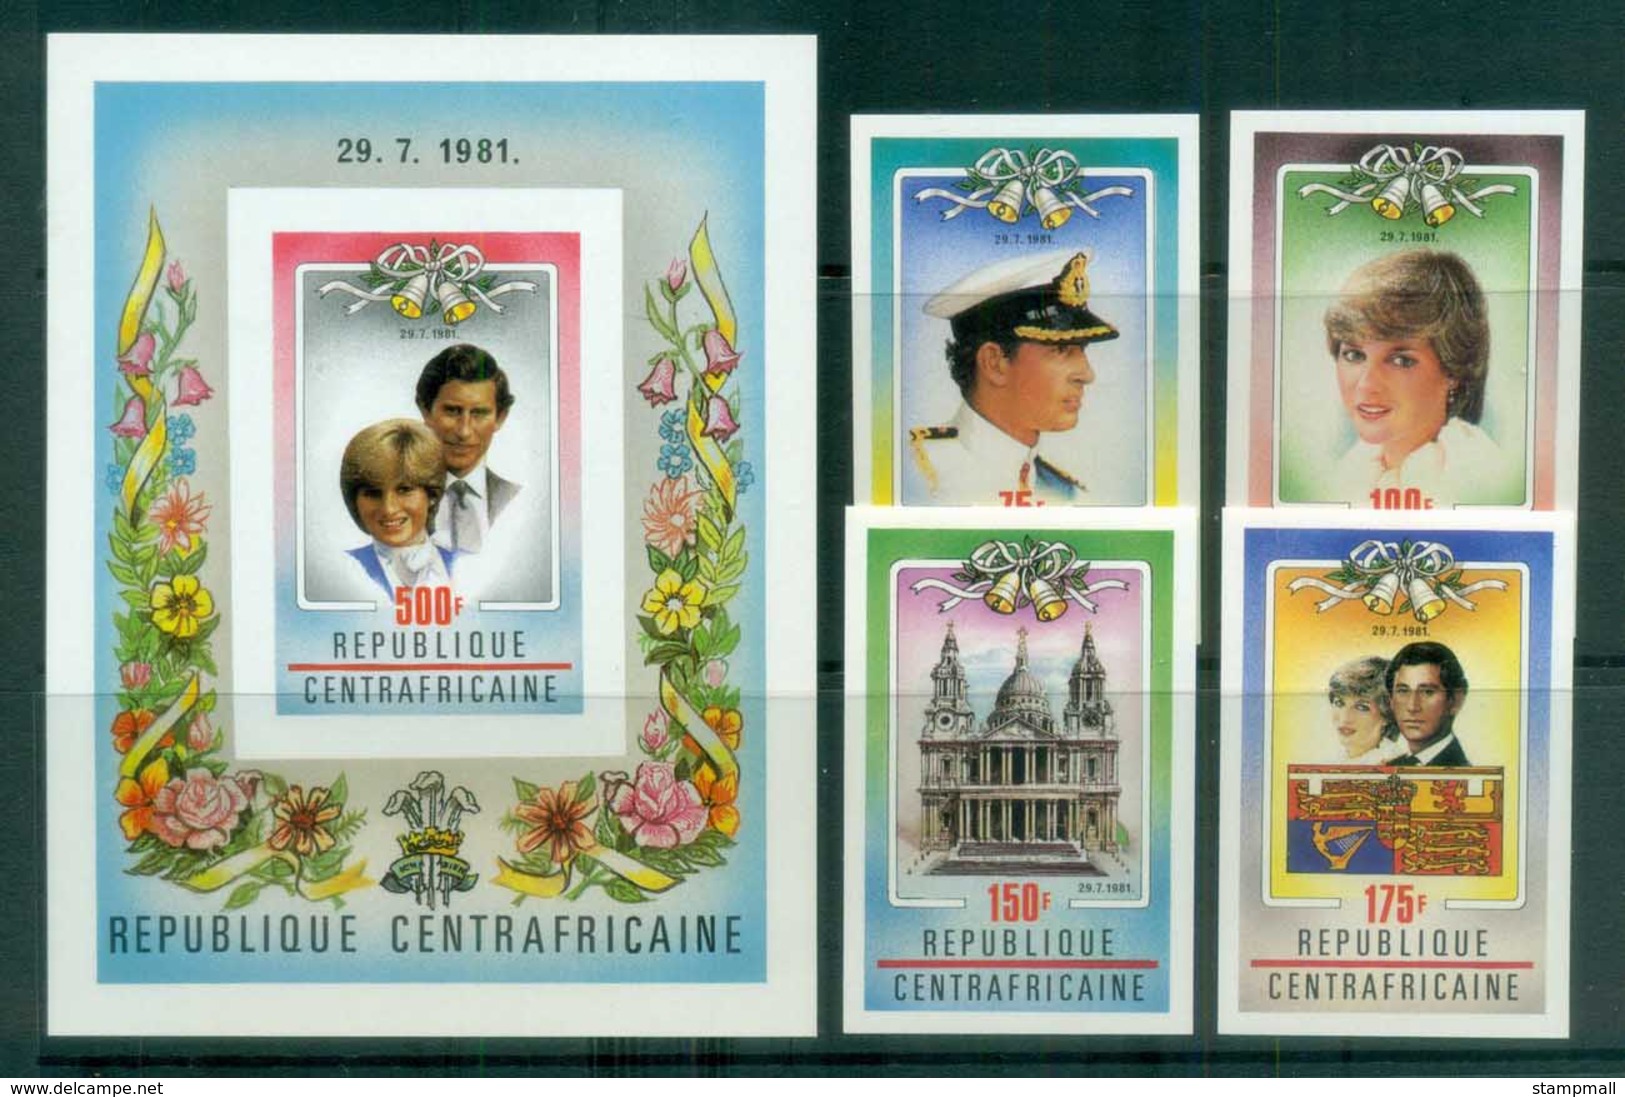 Central African Republic 1981 Charles & Diana Royal Wedding IMPERF + MS MUH Lot81909 - Central African Republic